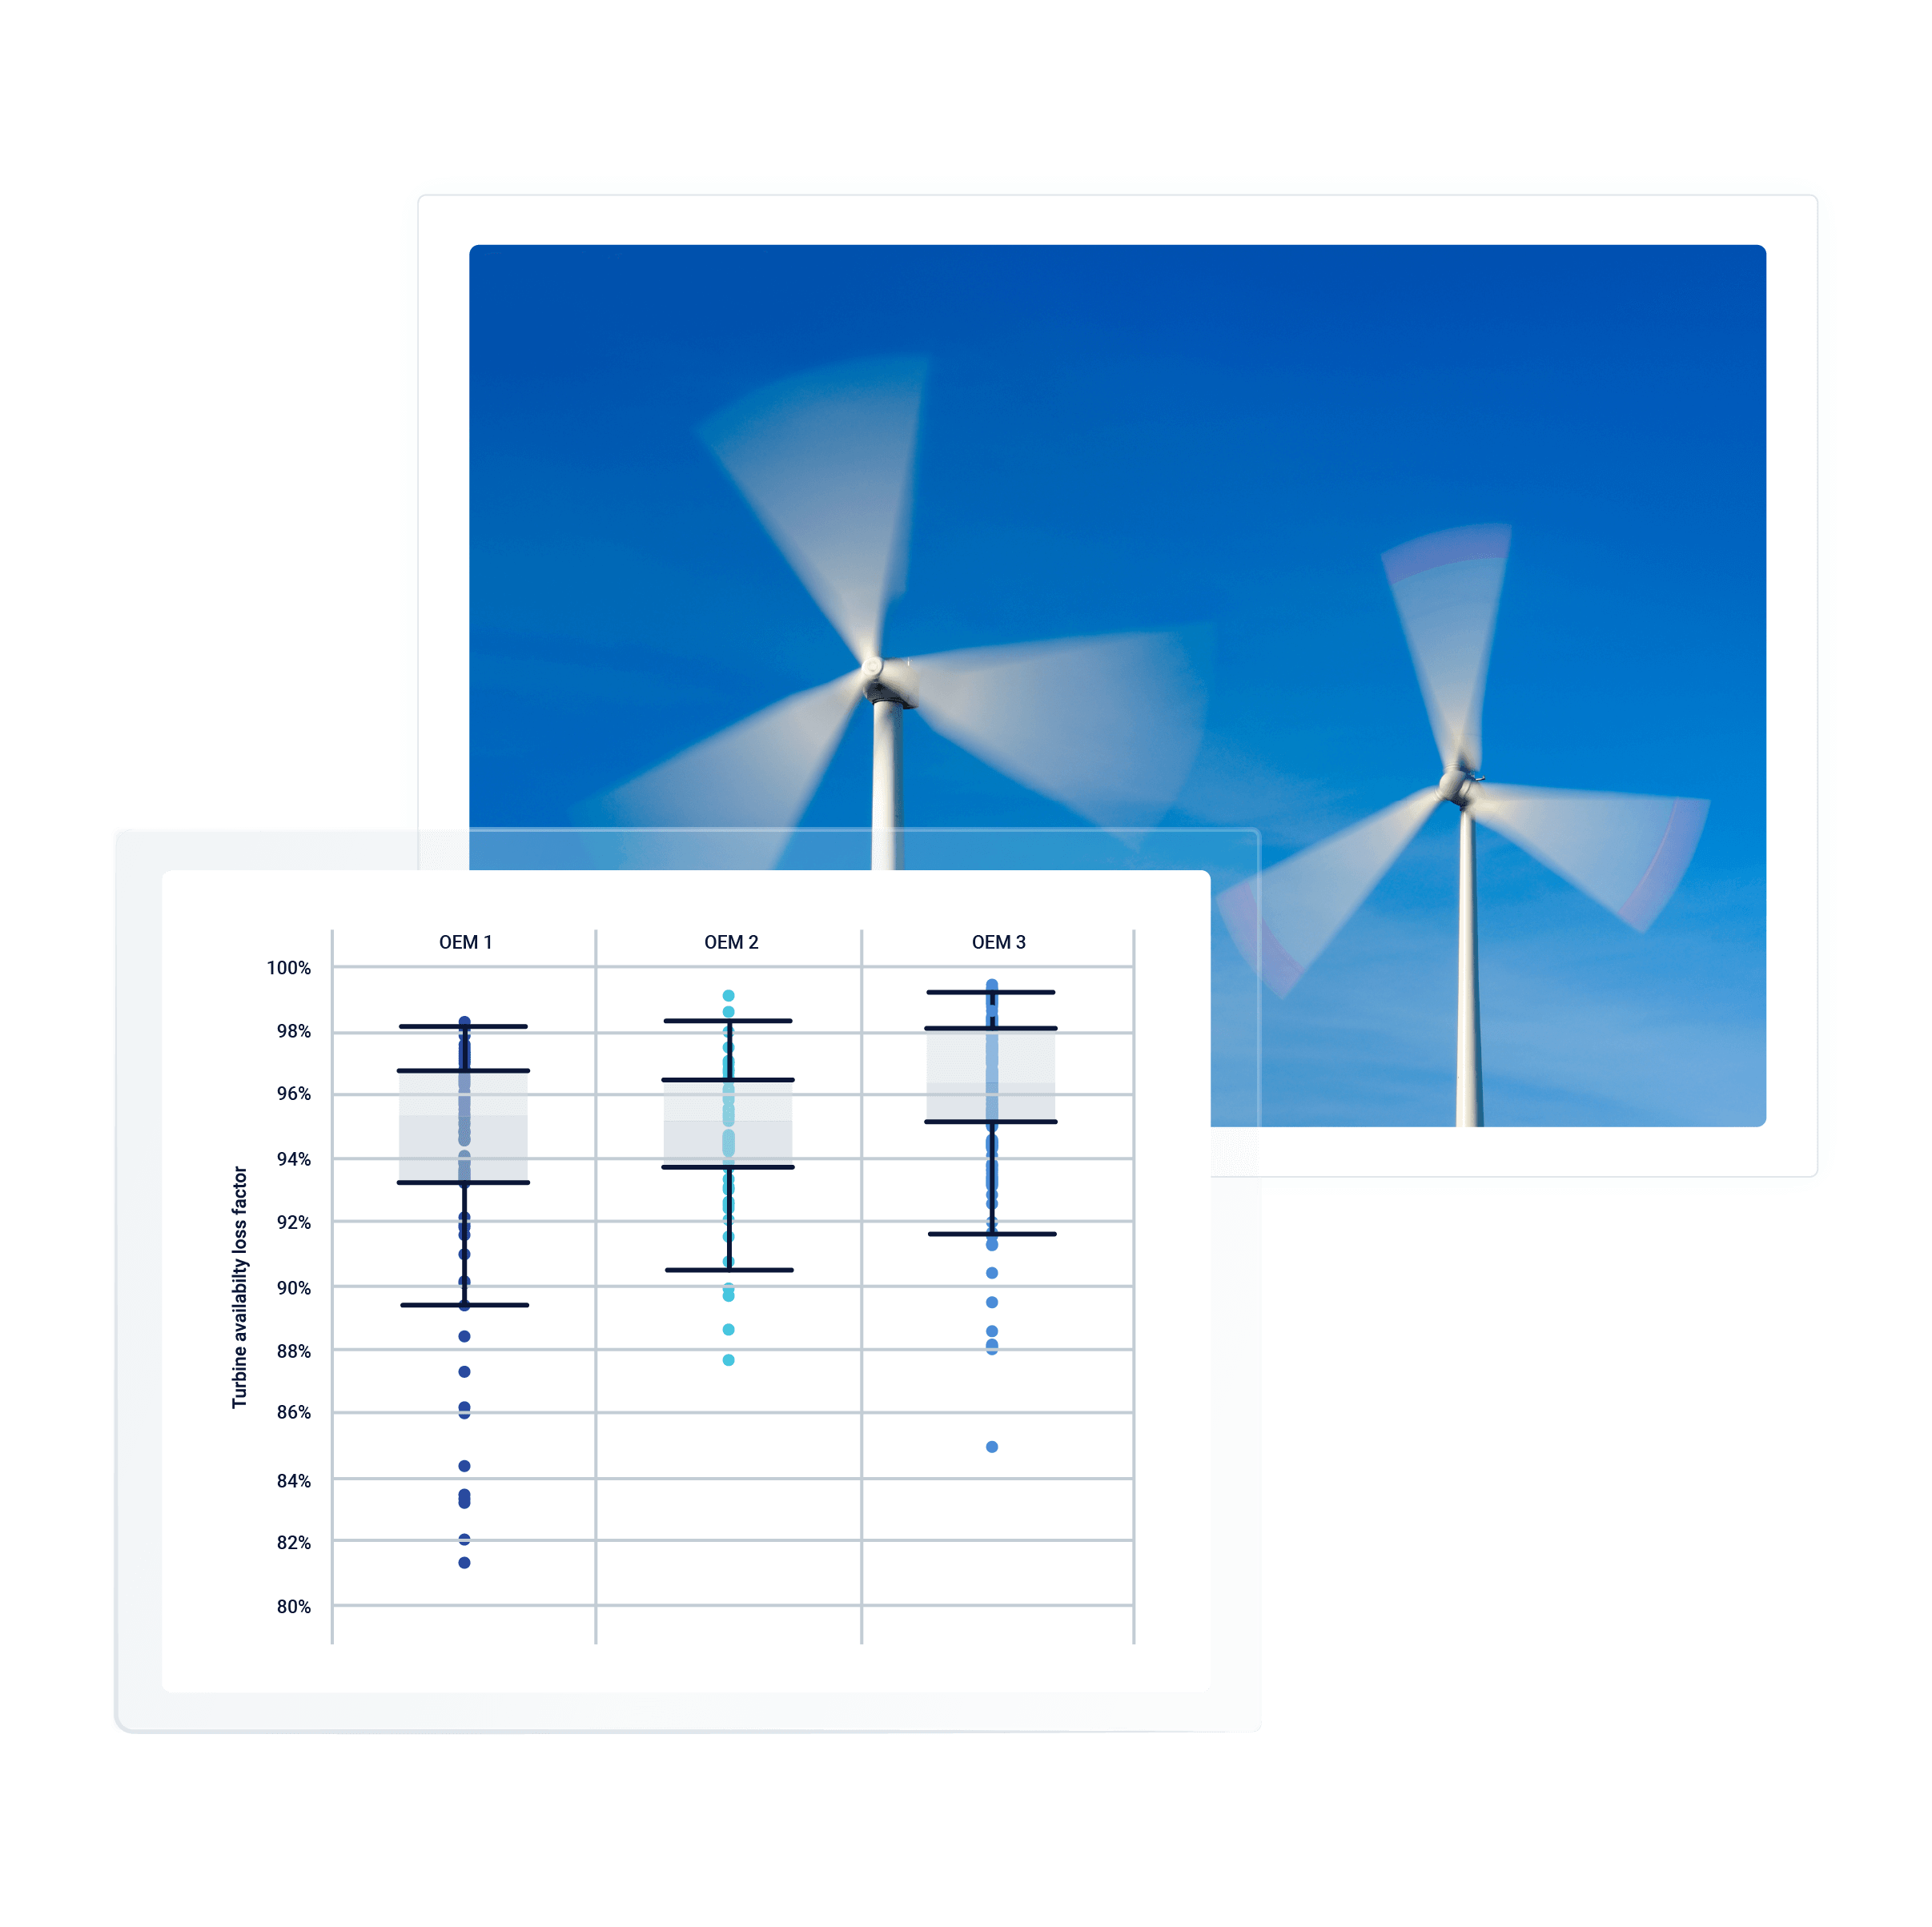 Image of wind turbines and comparisons of three OEMs